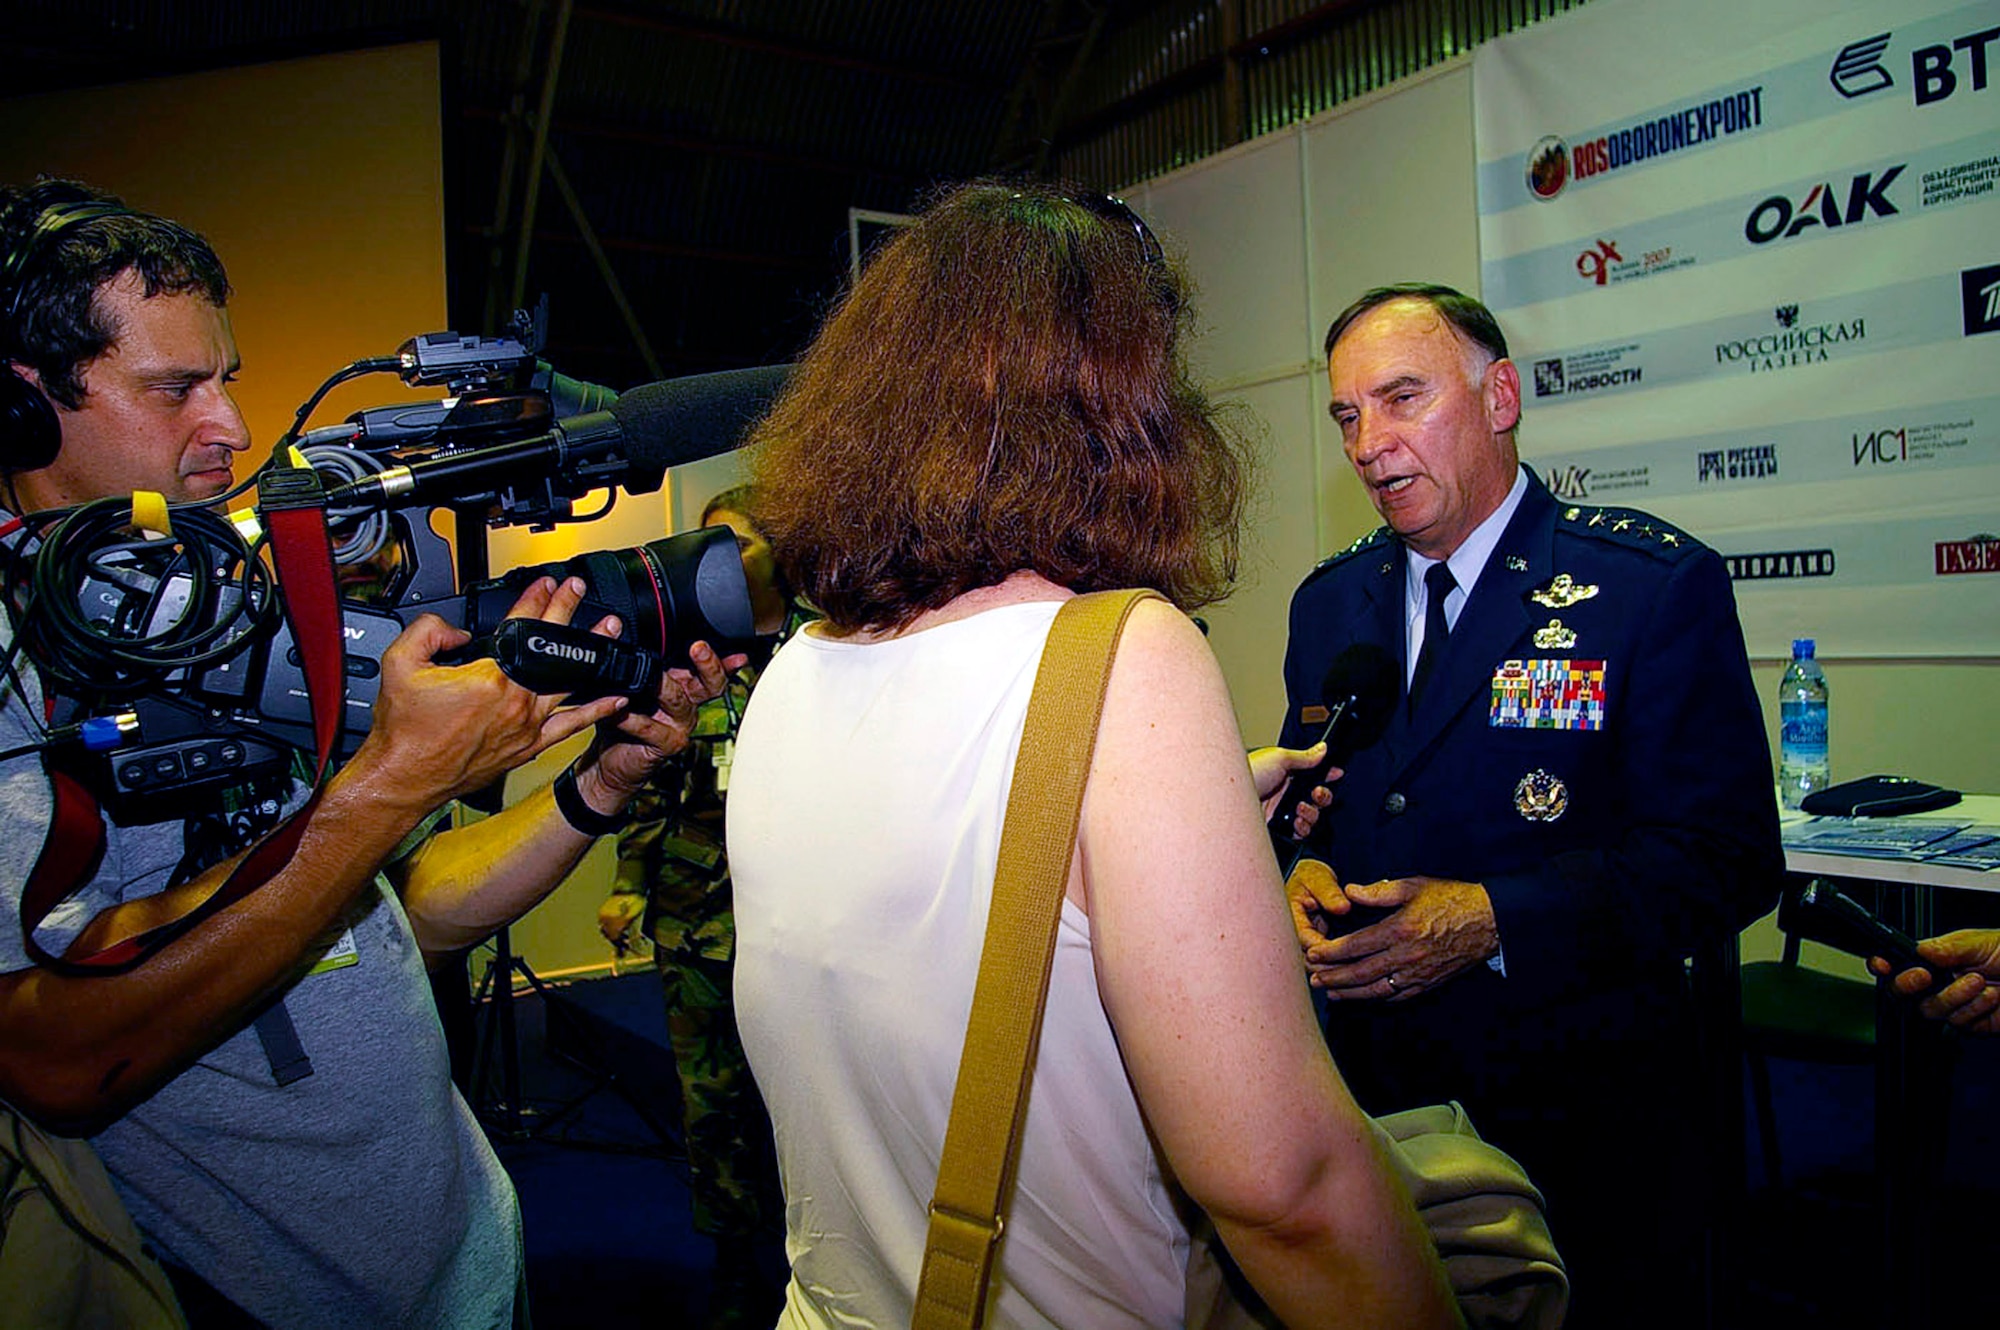 Gen. William T. Hobbins gives an interview to Ellen Pinchuk from Bloomberg News during the opening day of the Moscow International Air Show Aug. 21 at Ramenskoye Airfield in Zhukovsky, Russia. The air show runs through Aug. 26 and includes Department of Defense participation of static displays and aerial flight demonstrations. The air show is one of the premier events of its type in the world. General Hobbins is commander of U.S. Air Forces in Europe. About 65 Airmen from bases worldwide are participating in this year's air show. (U.S. Air Force photo/Karen Abeyasekere) 
